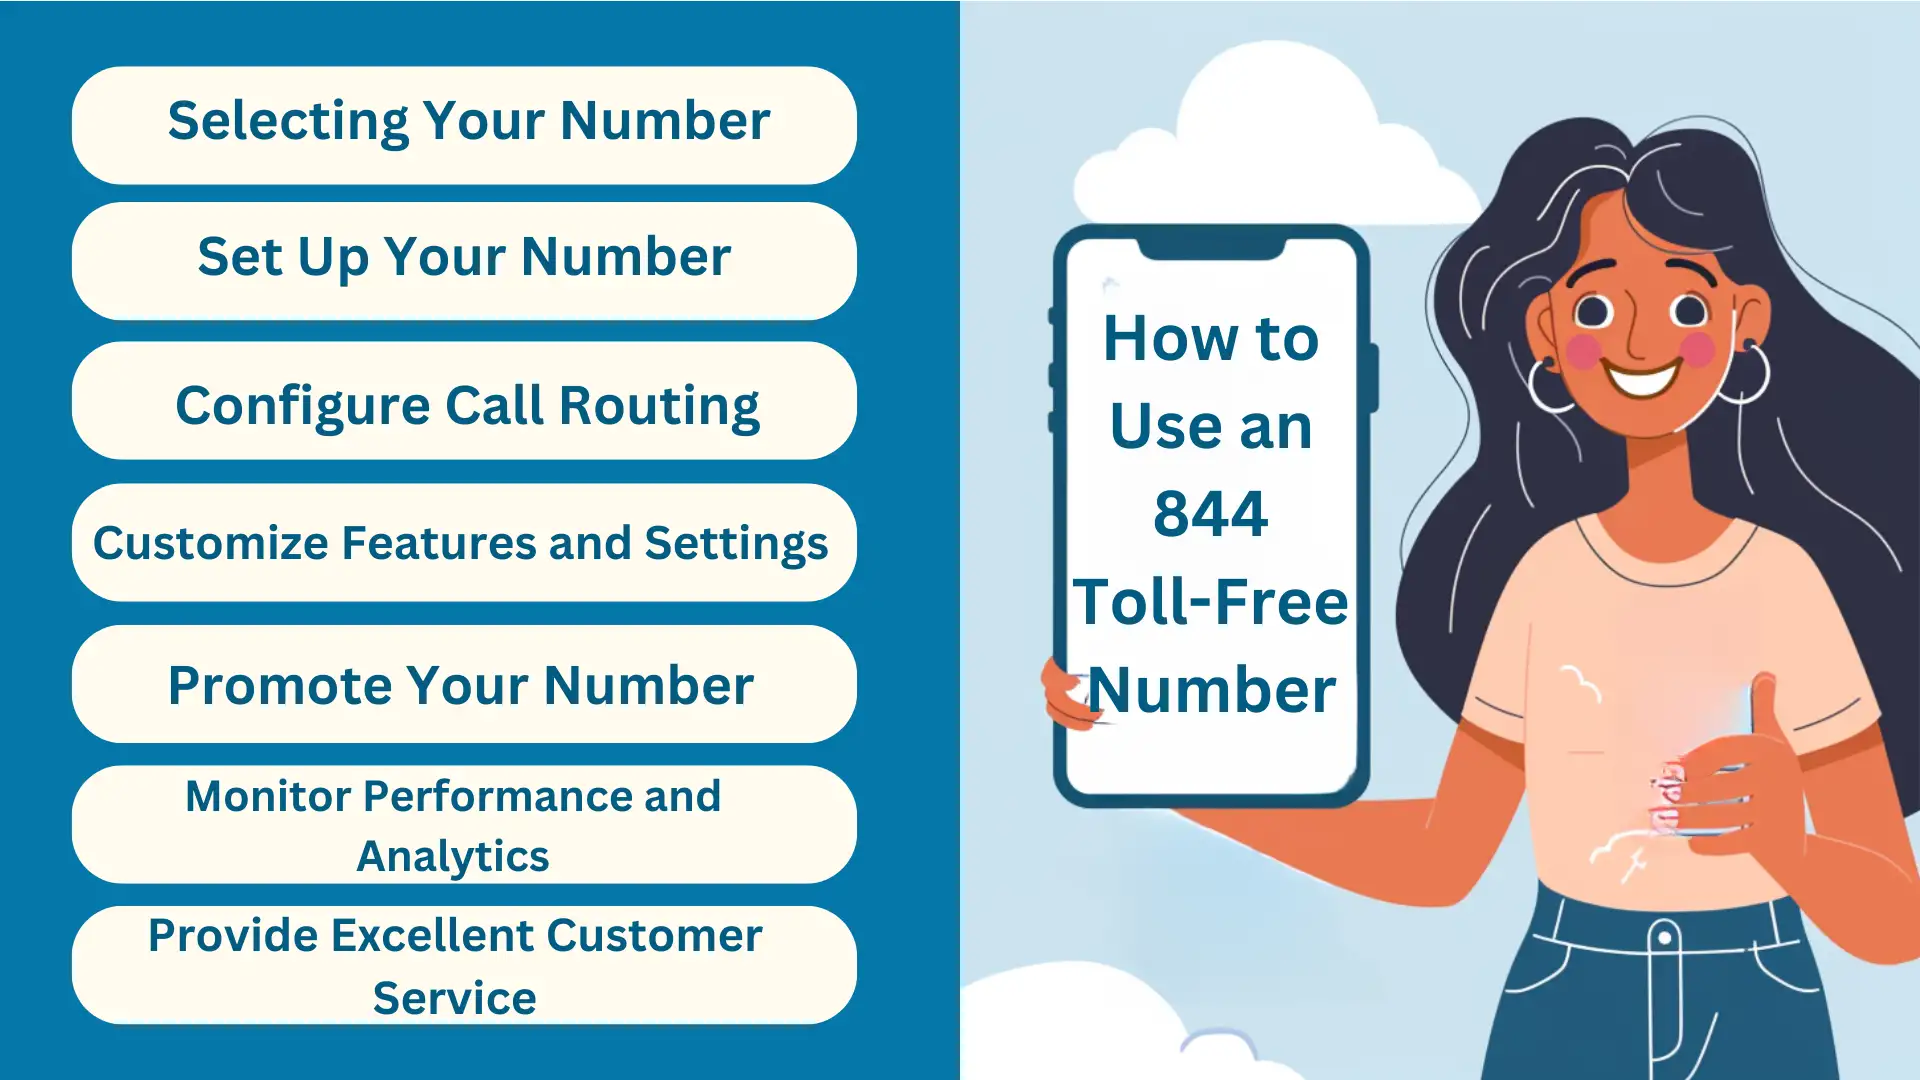 How to Use an 844 Toll-Free Number